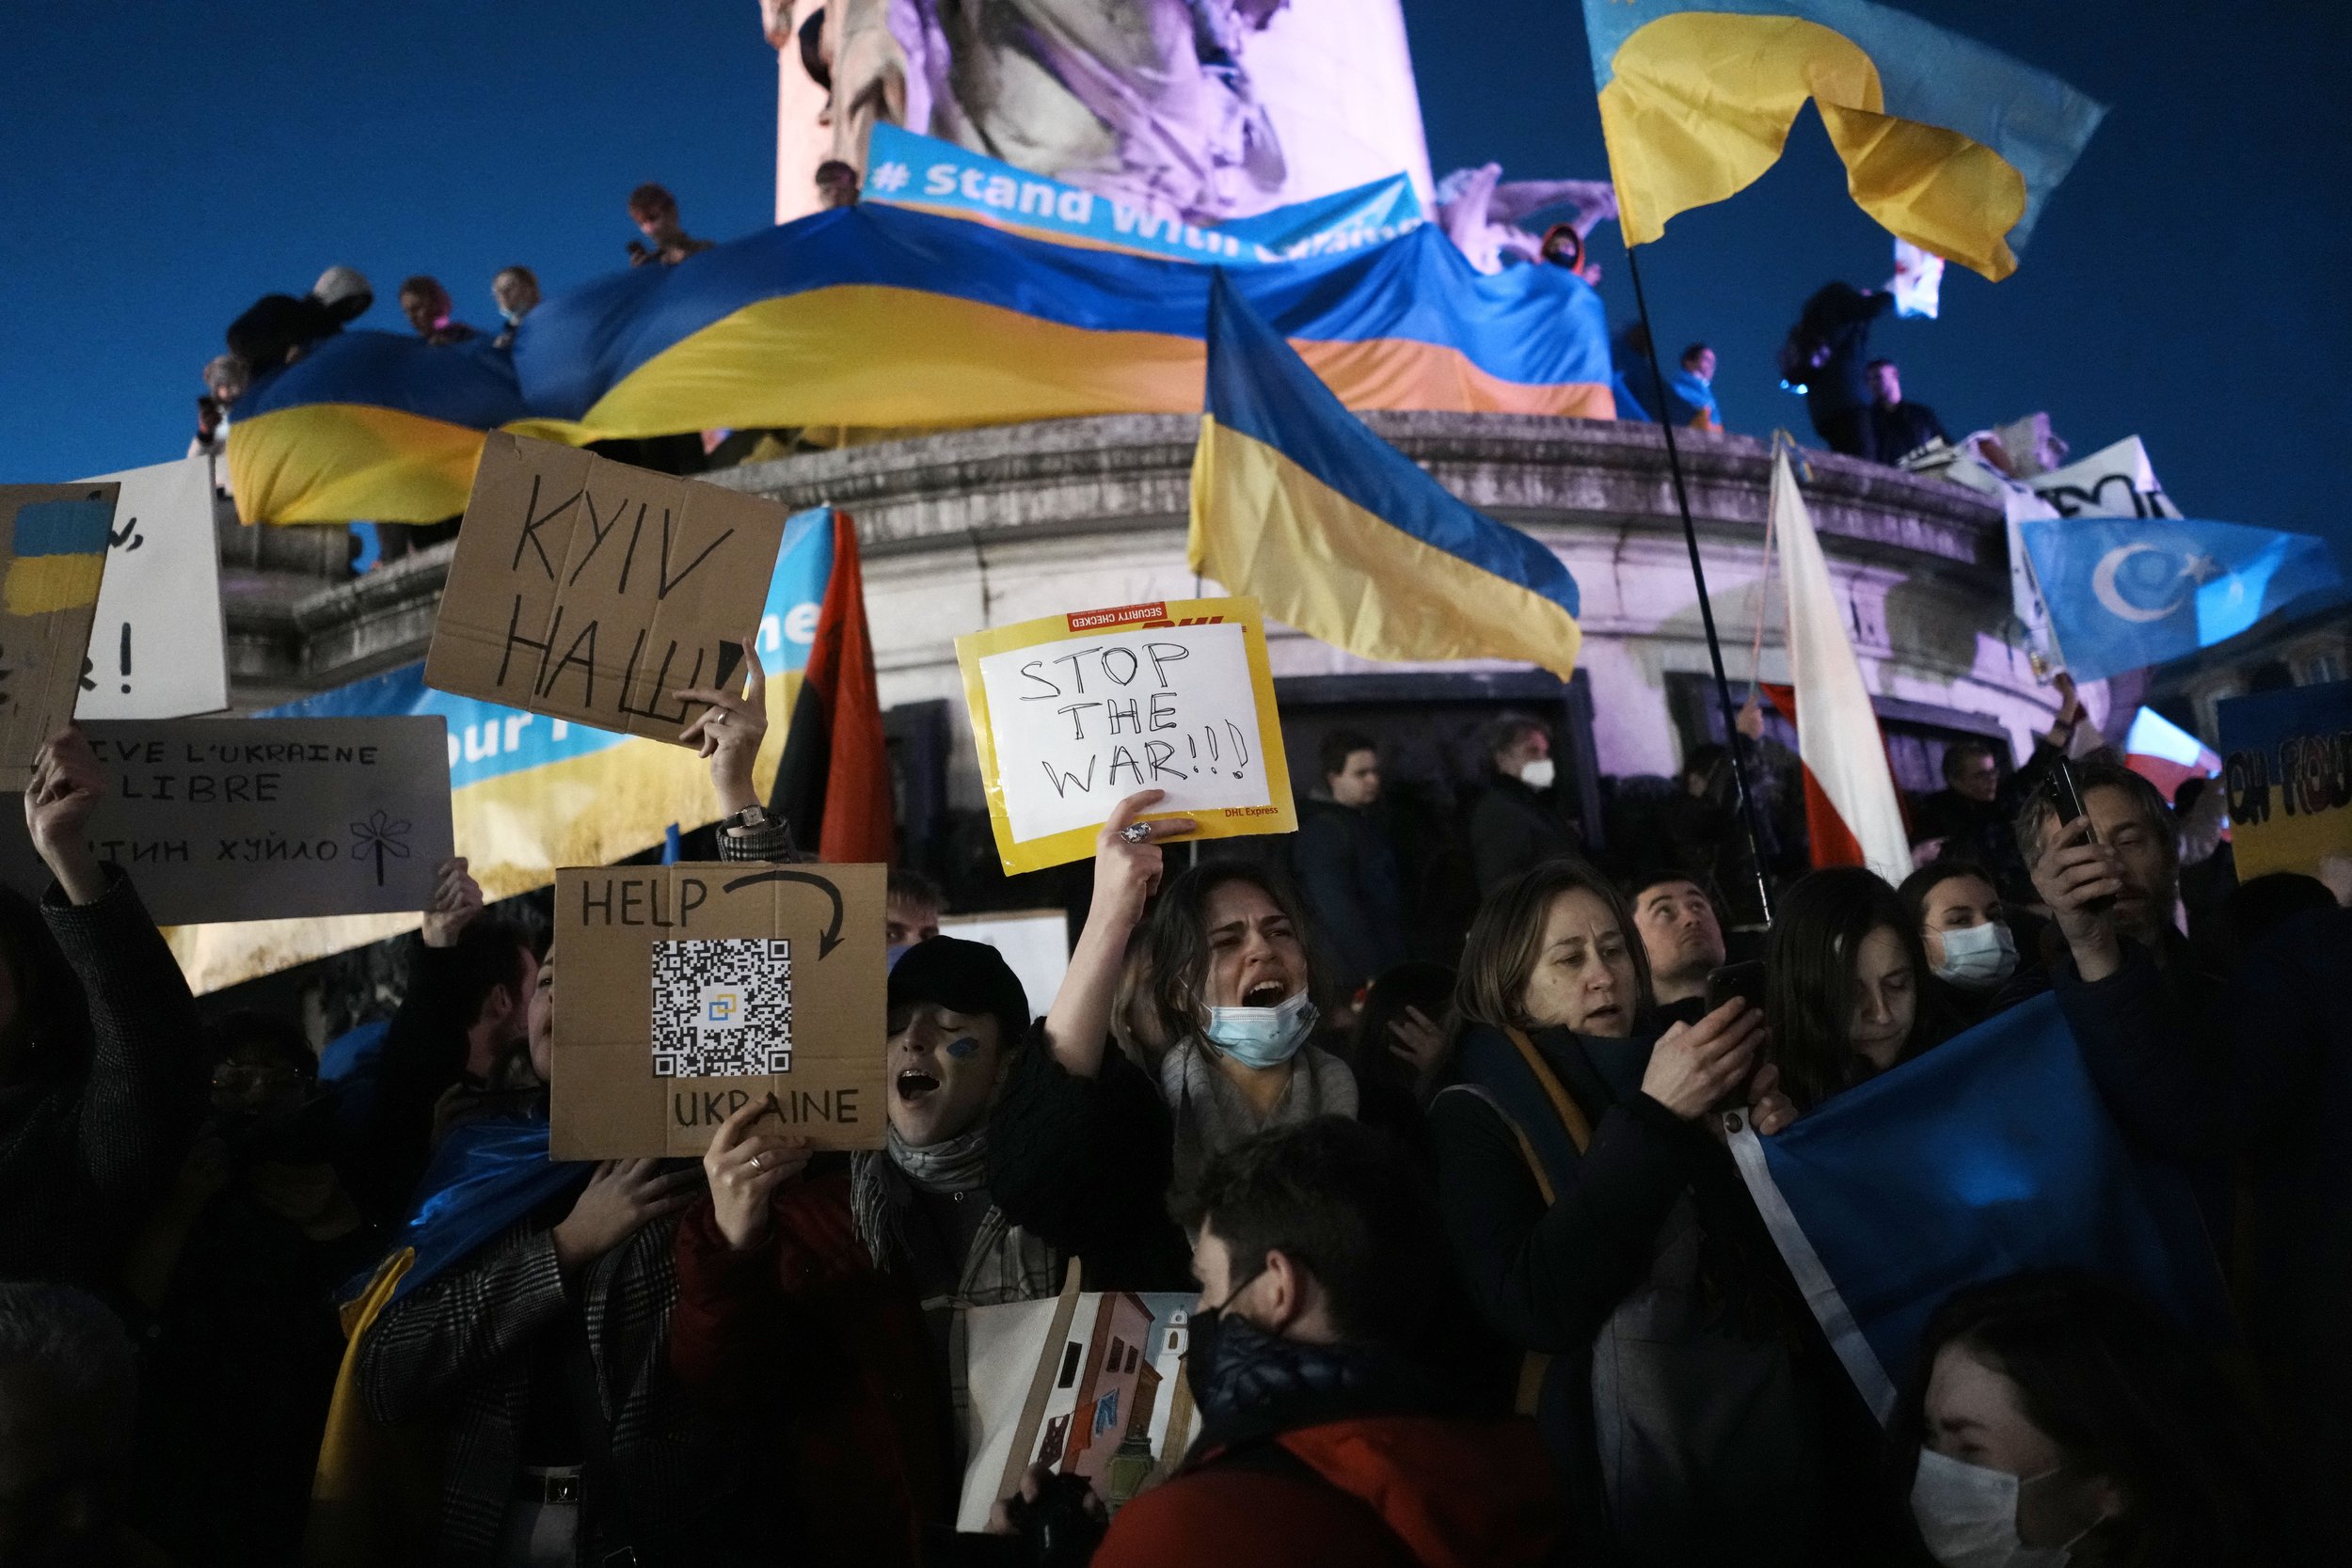  People hold Ukrainian flags and placards as they gather in support of Ukrainian people, in Paris, Thursday, Feb. 24, 2022. (AP Photo/Thibault Camus) 